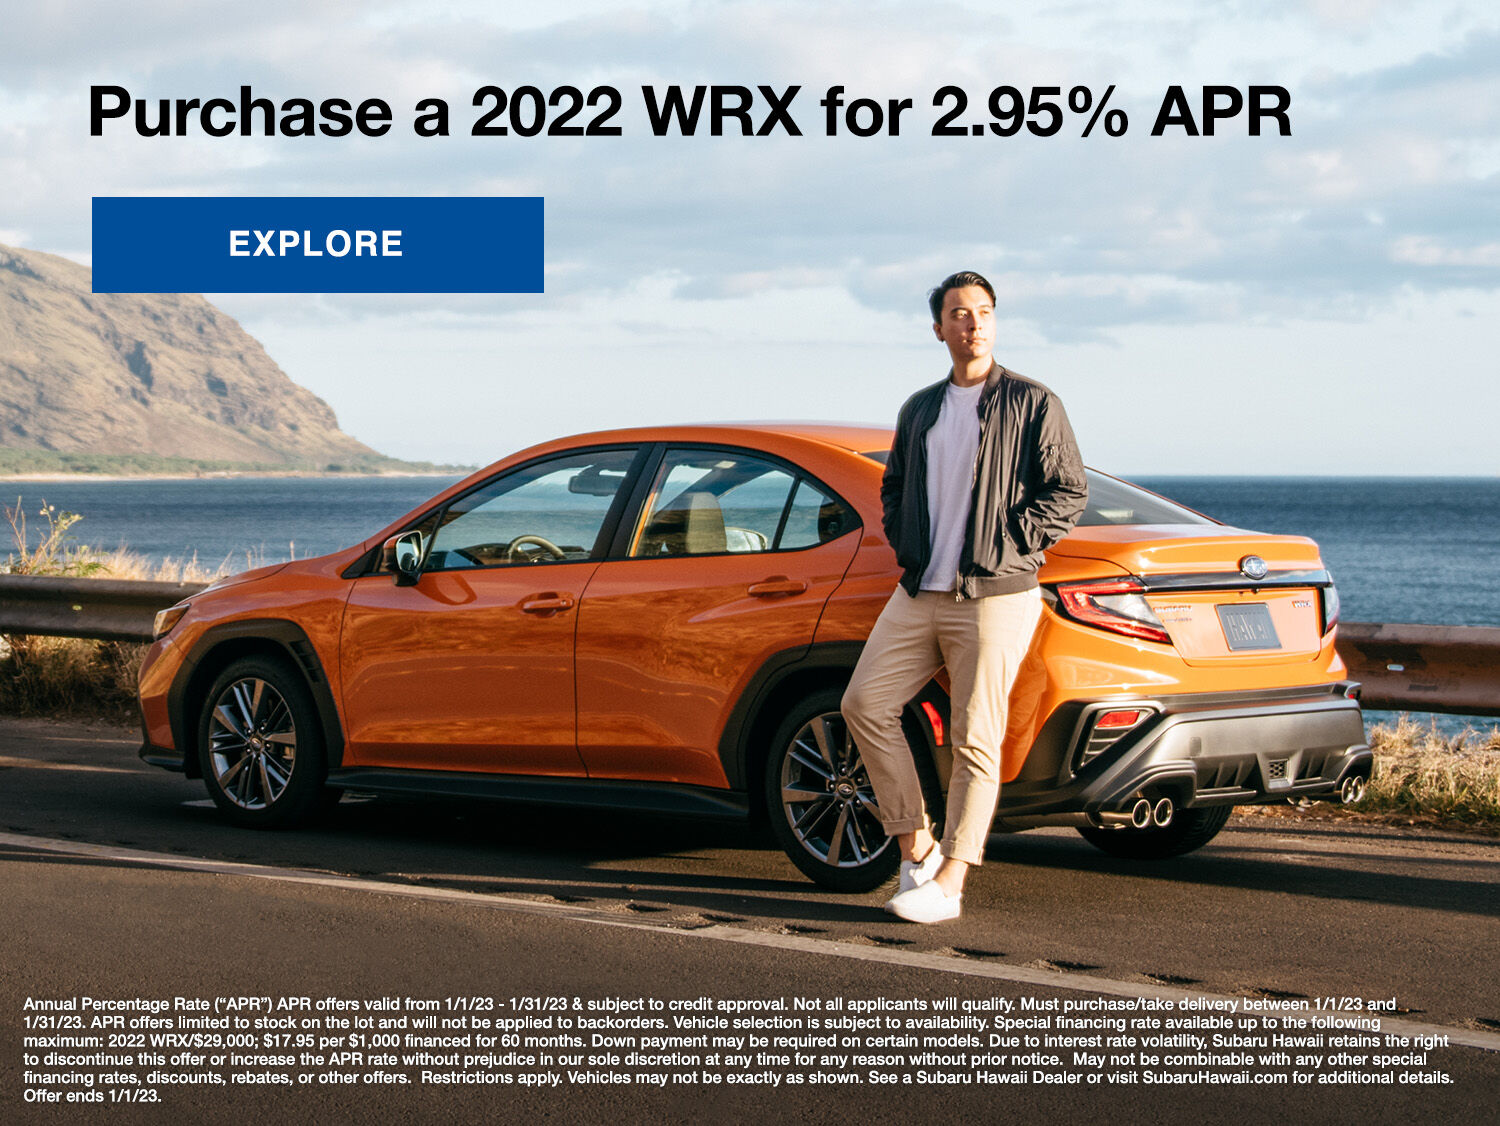 Purchase a 2022 WRX for 2.95% APR